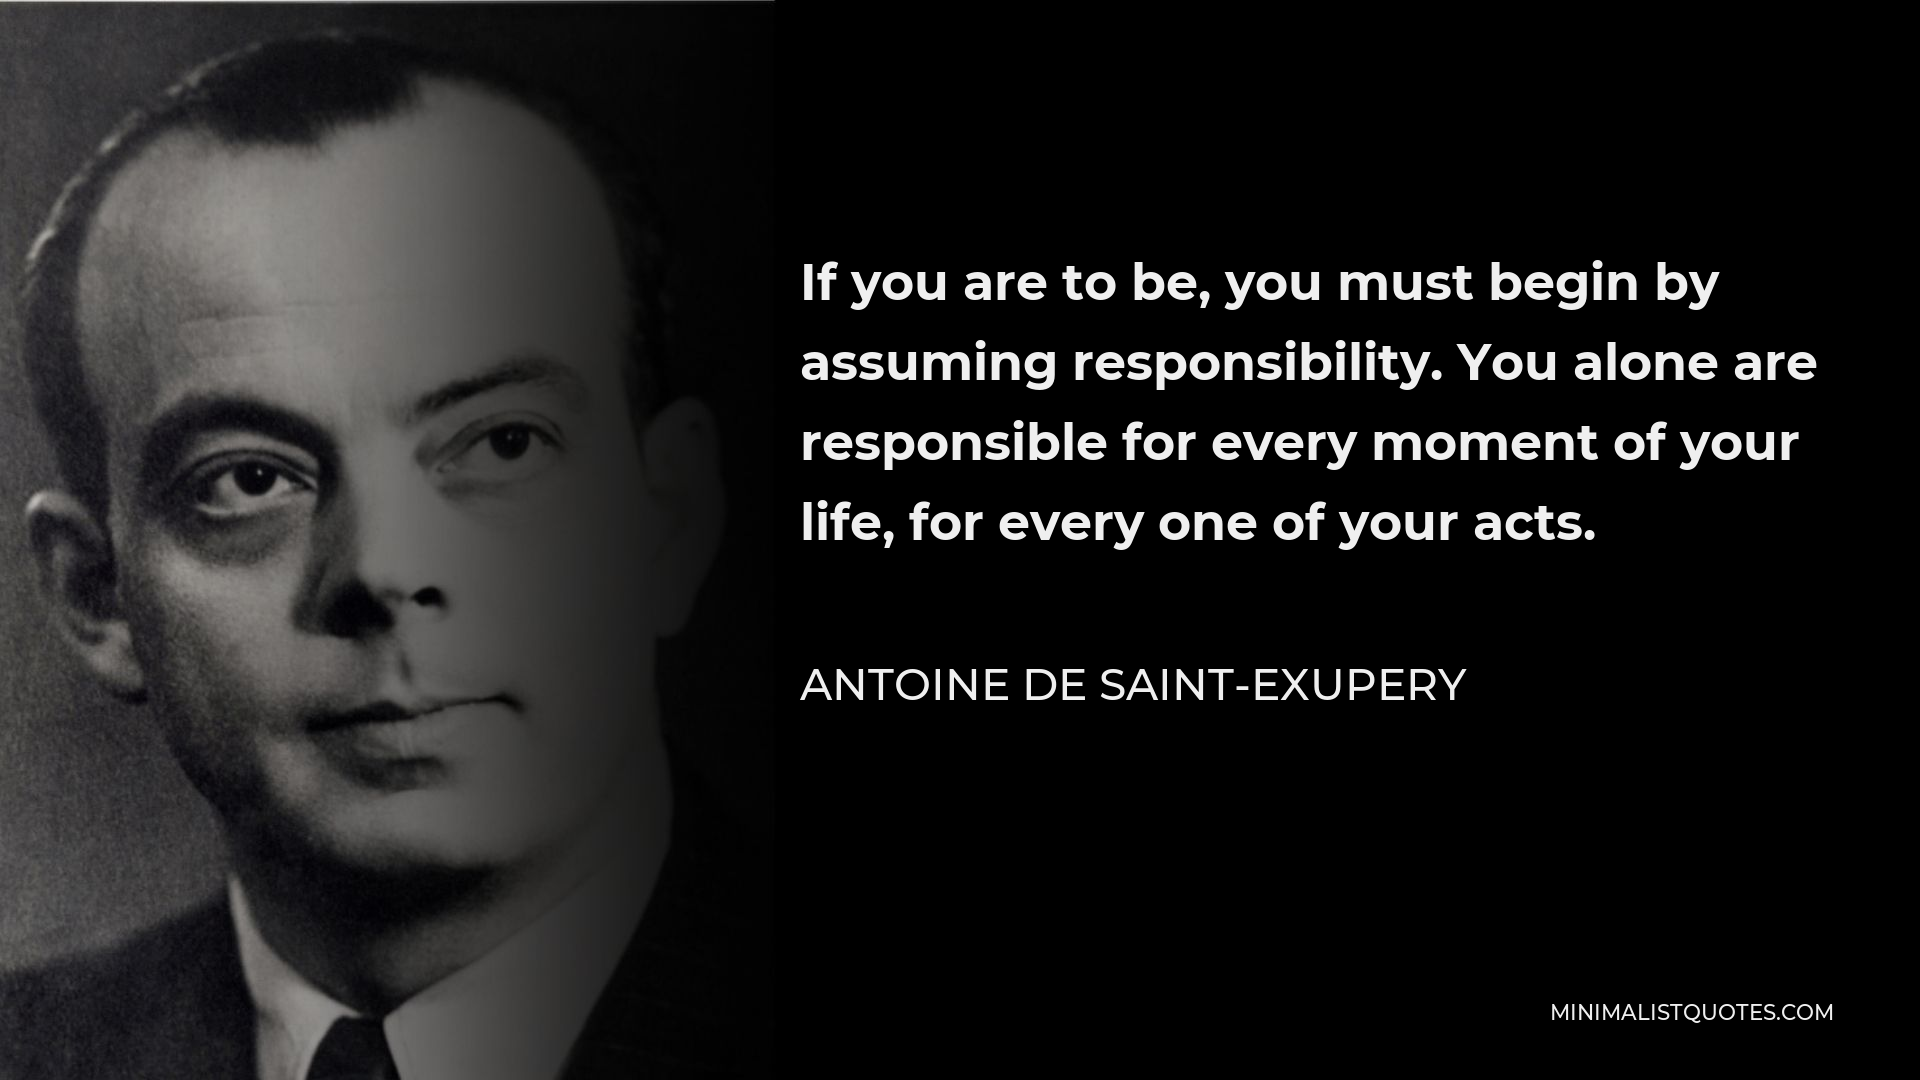 Antoine de Saint-Exupery Quote - If you are to be, you must begin by assuming responsibility. You alone are responsible for every moment of your life, for every one of your acts.